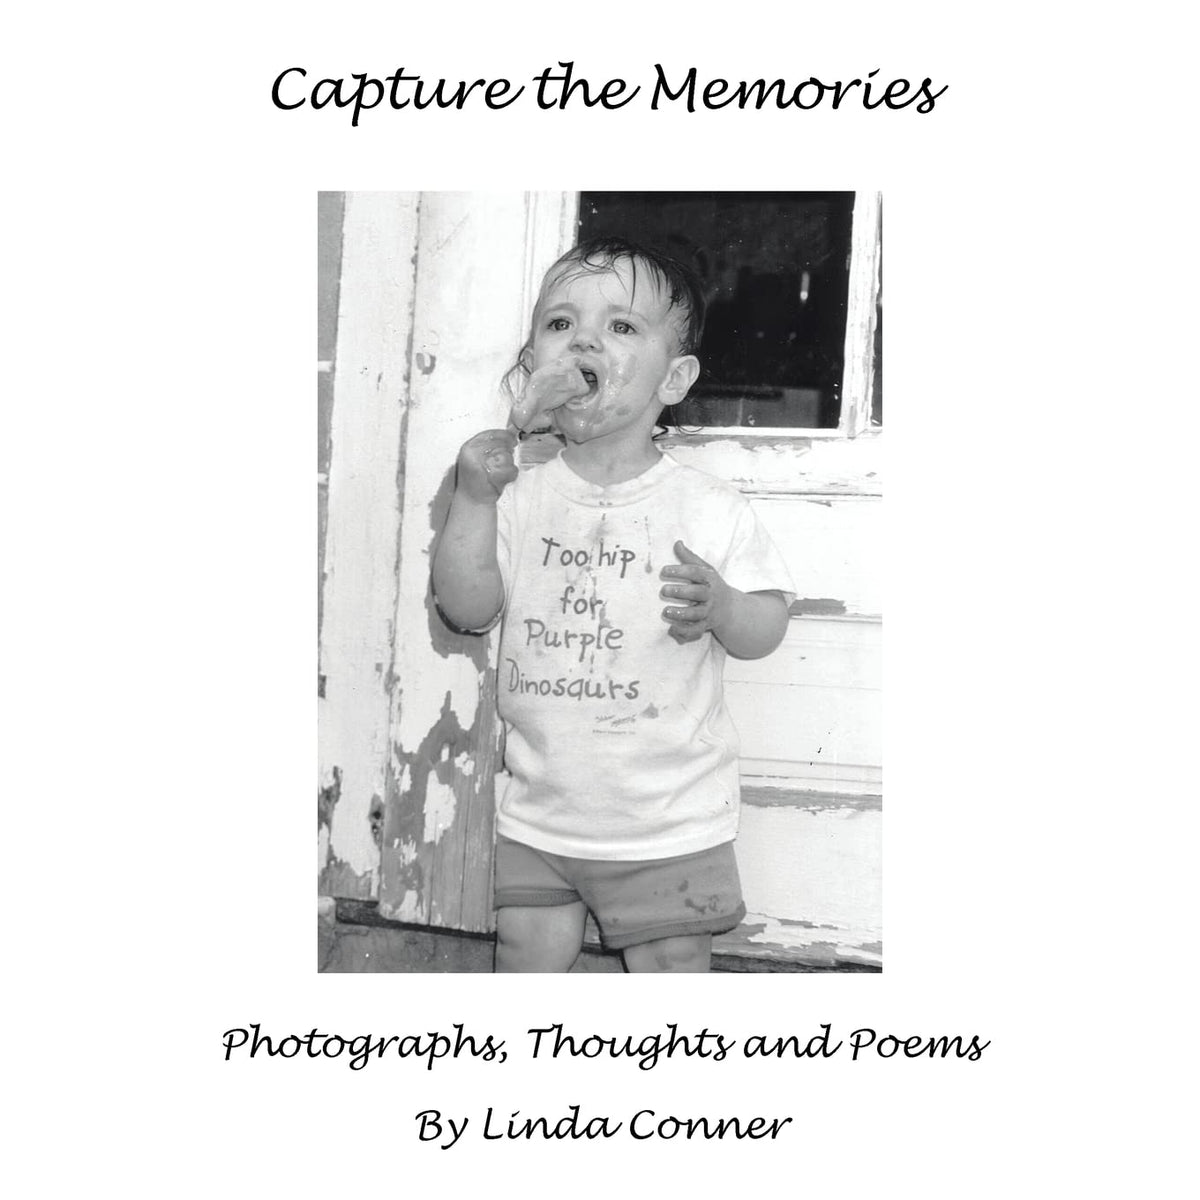 Capture the Memories: Photographs, Thoughts and Poems